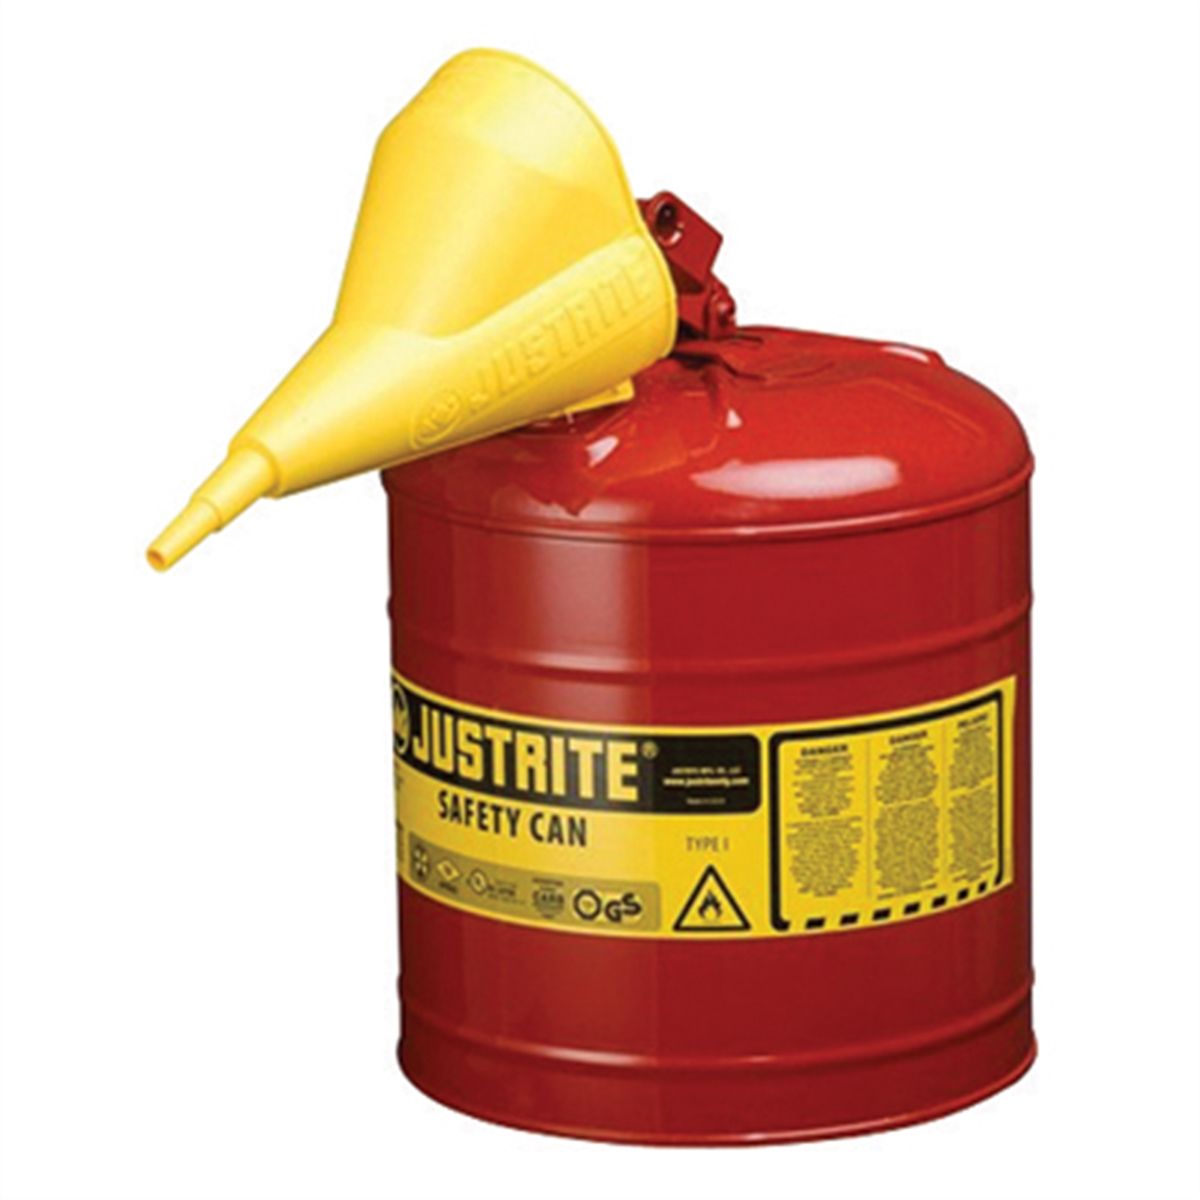 5 Gallon Steel Safety Can Type I w Funnel